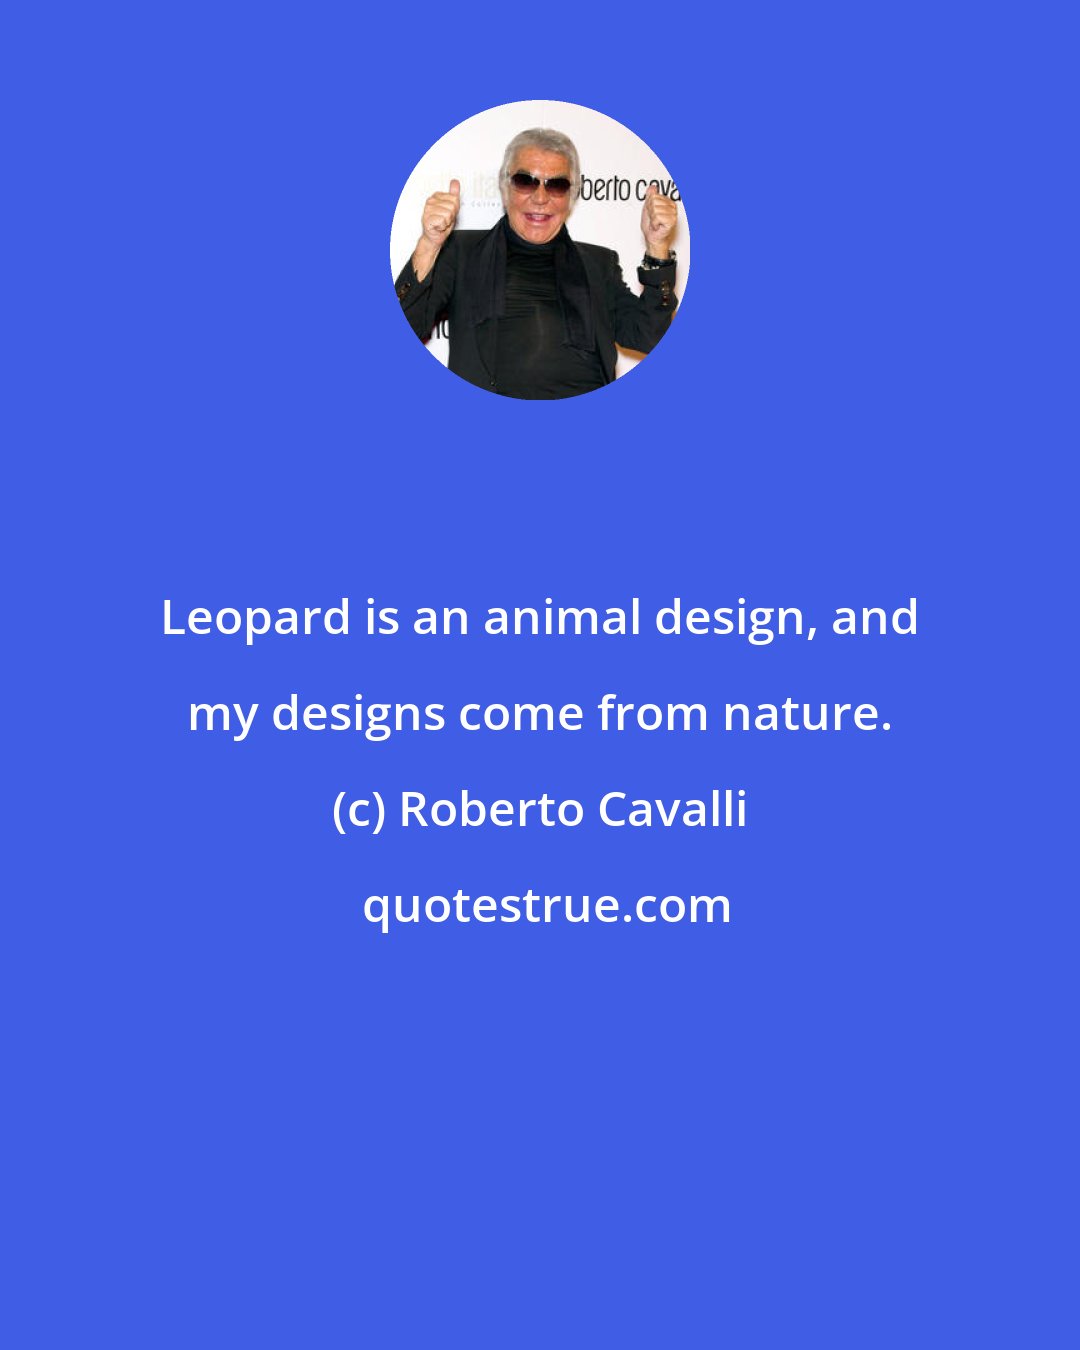 Roberto Cavalli: Leopard is an animal design, and my designs come from nature.